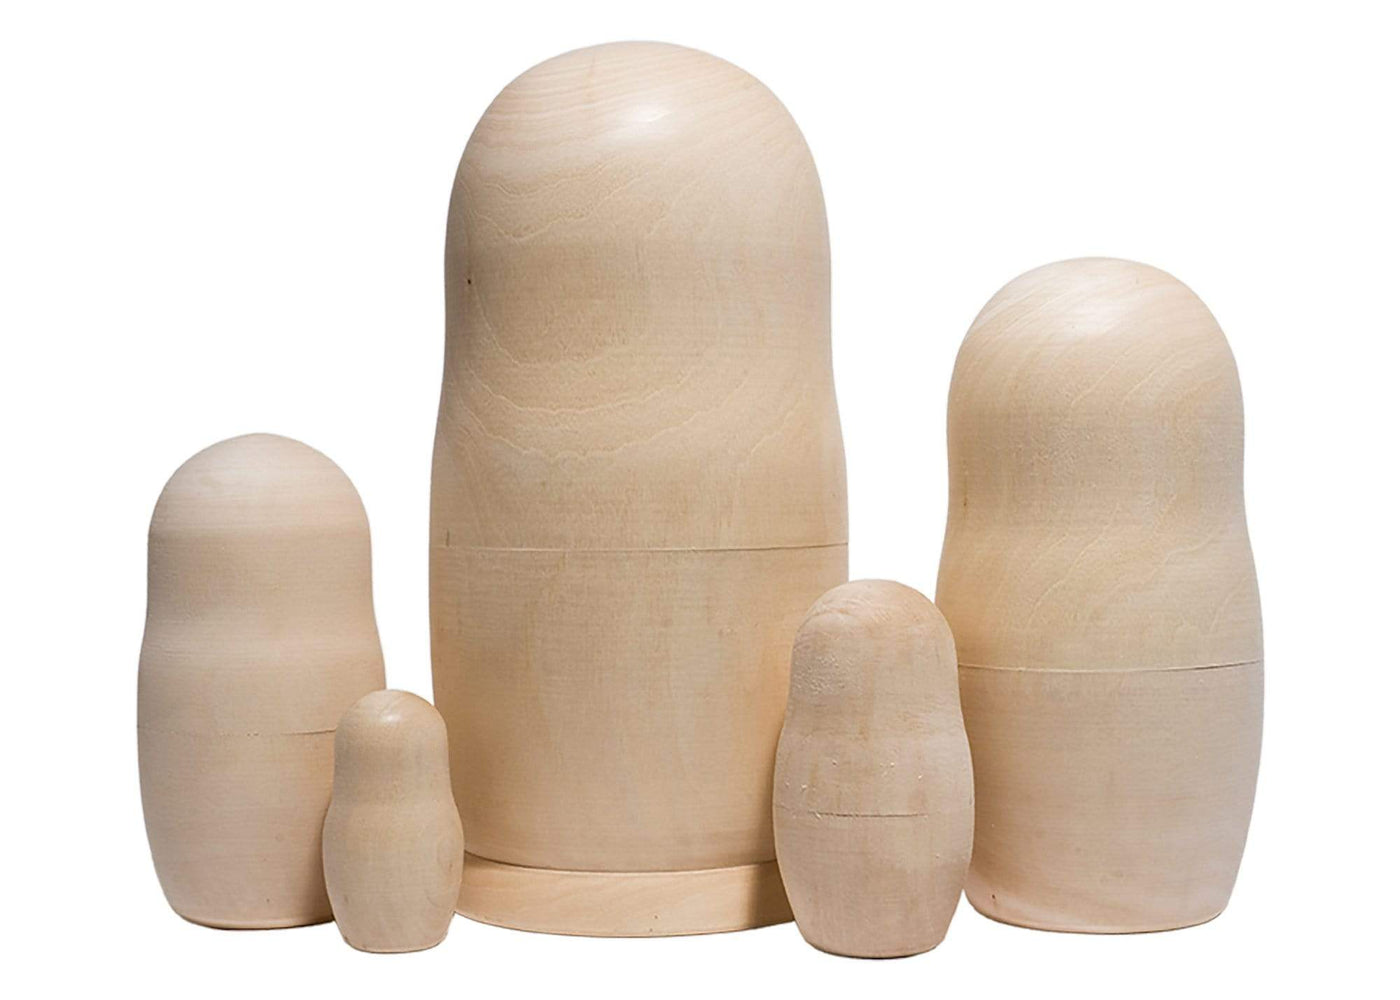 Wooden 6" Blank Nesting Doll Set - 5 pieces